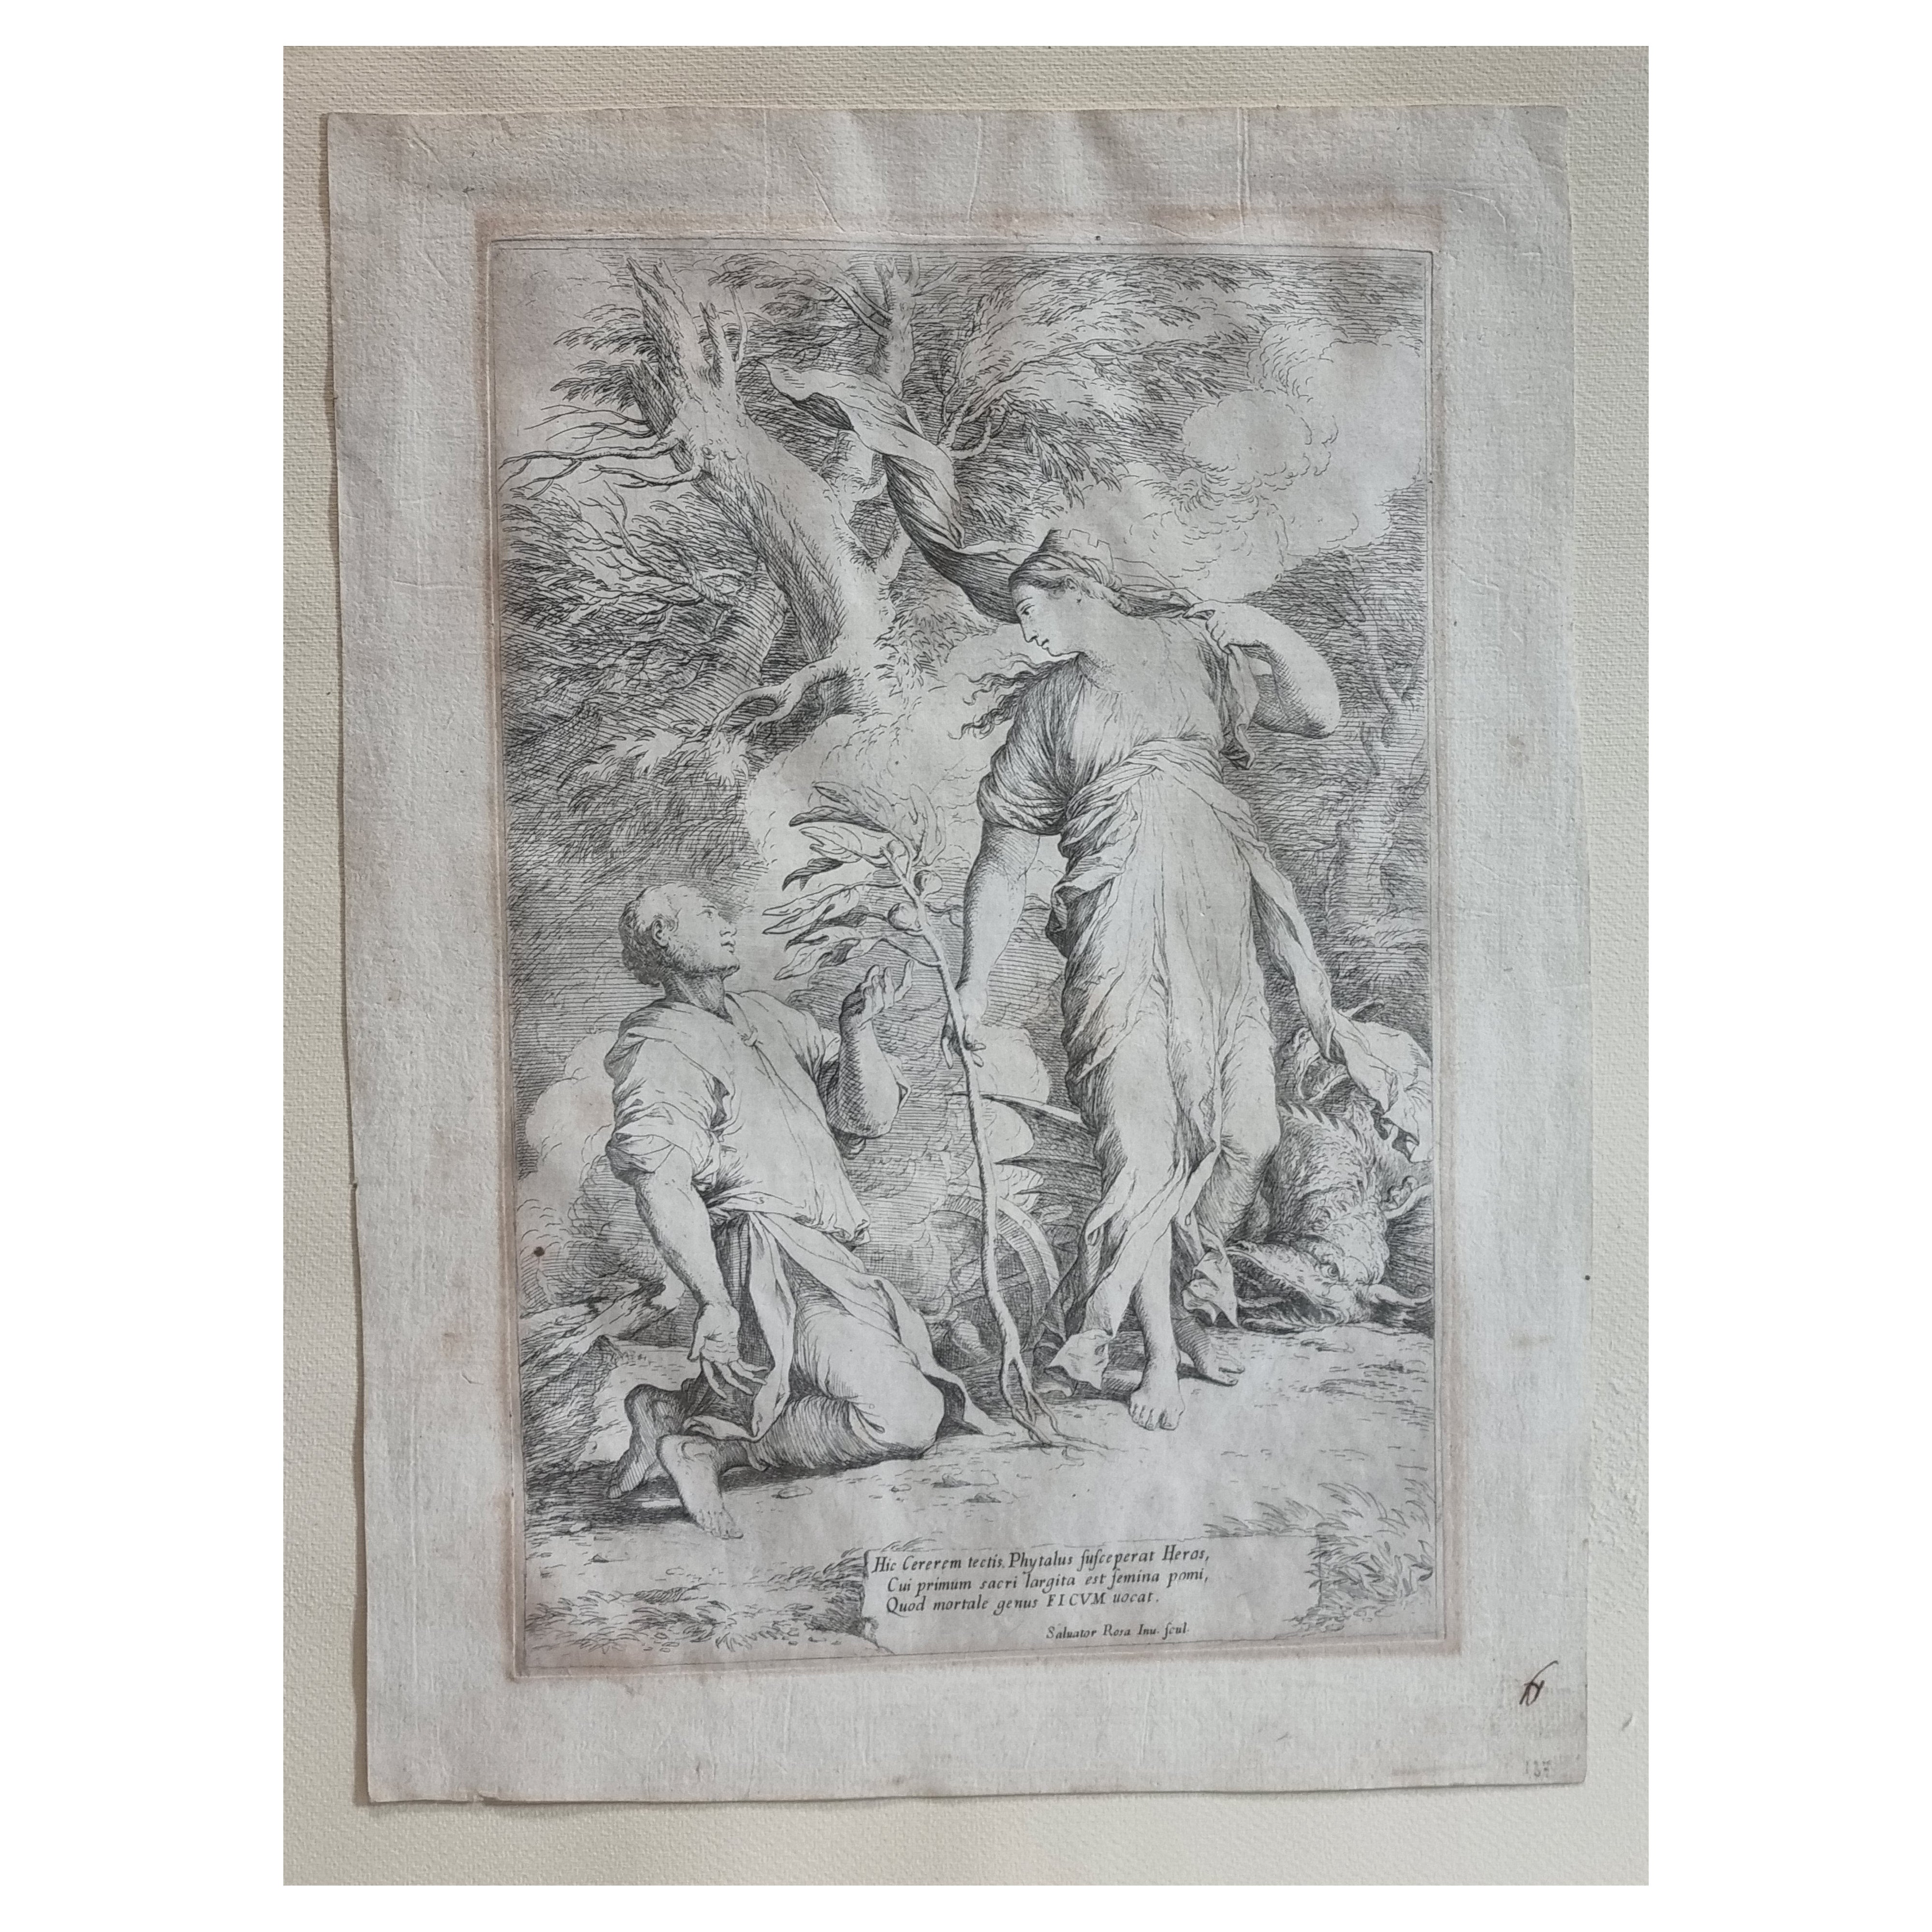 17th Century Etchingn and Drypoint" Ceres and Phytalus" by Salvator Rosa, 1662